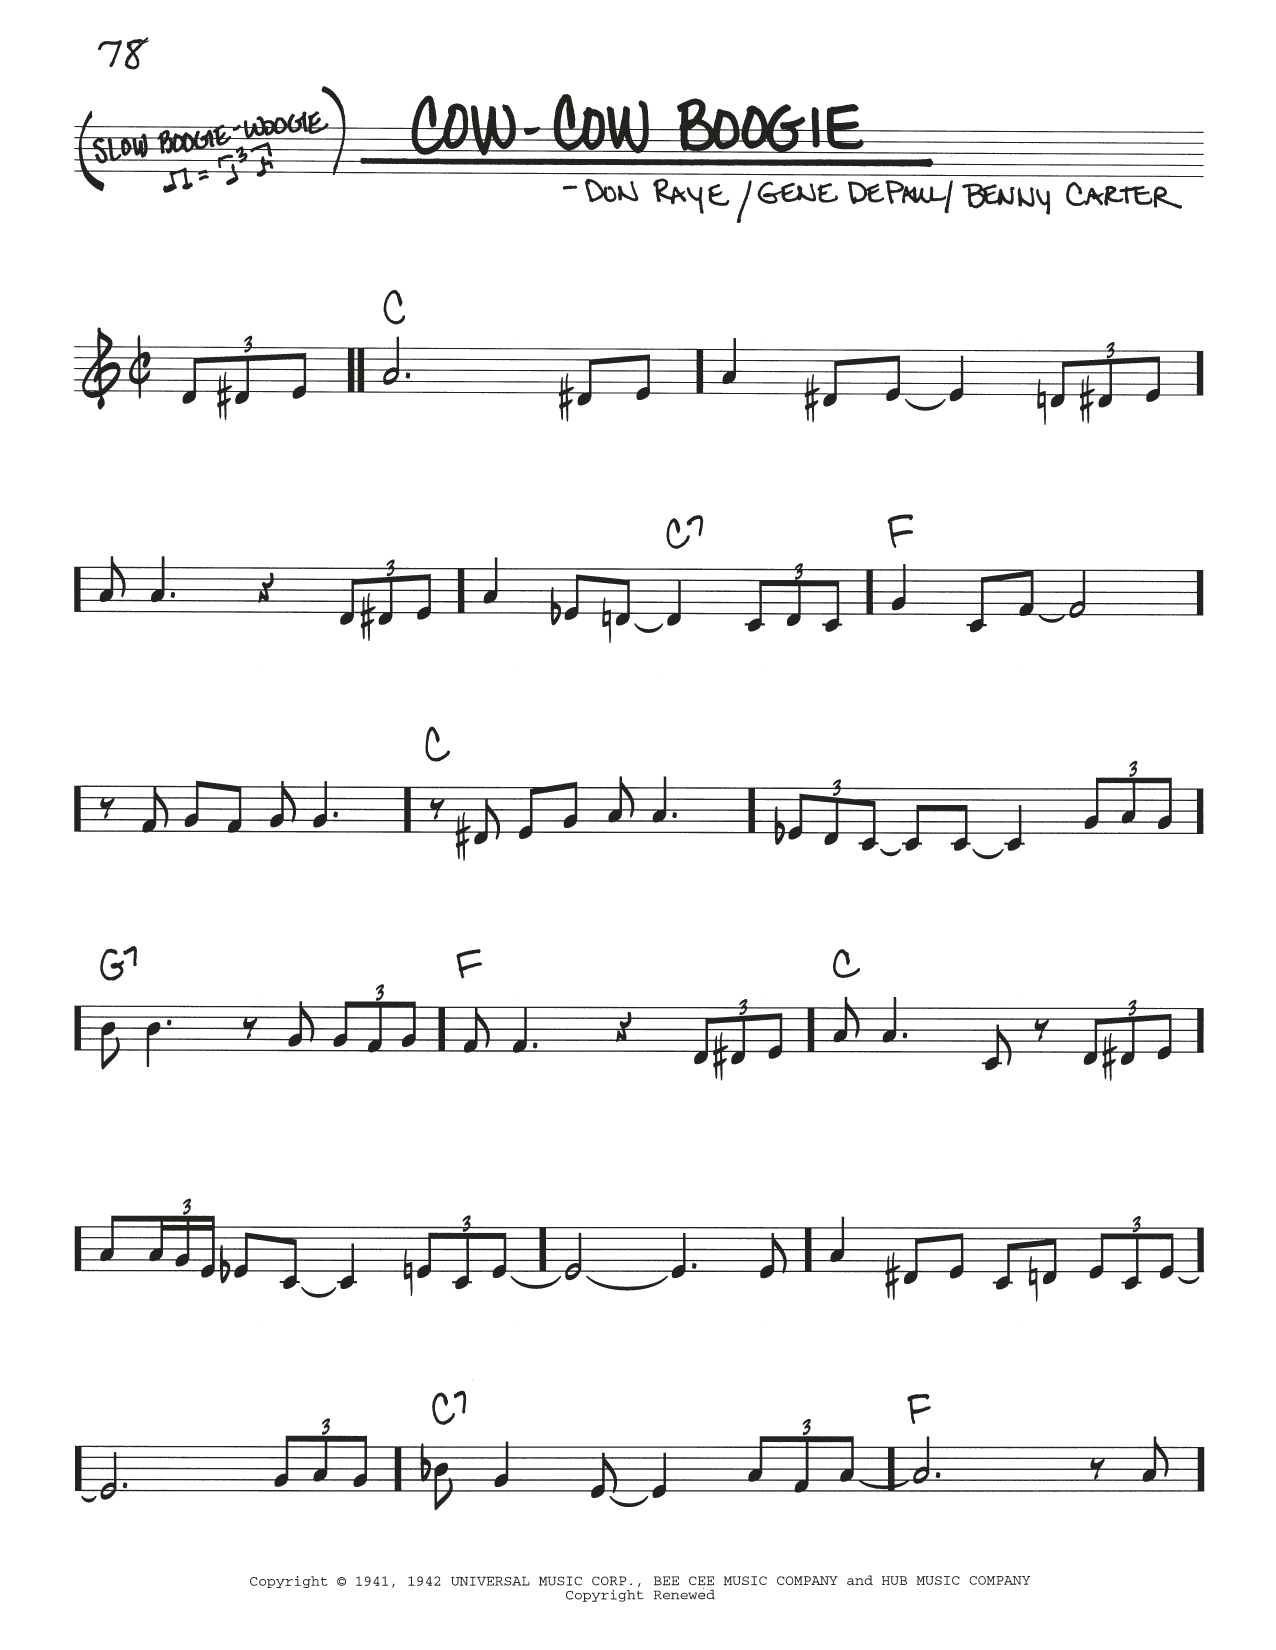 Download Freddie Slack & His Orchestra Cow-Cow Boogie Sheet Music